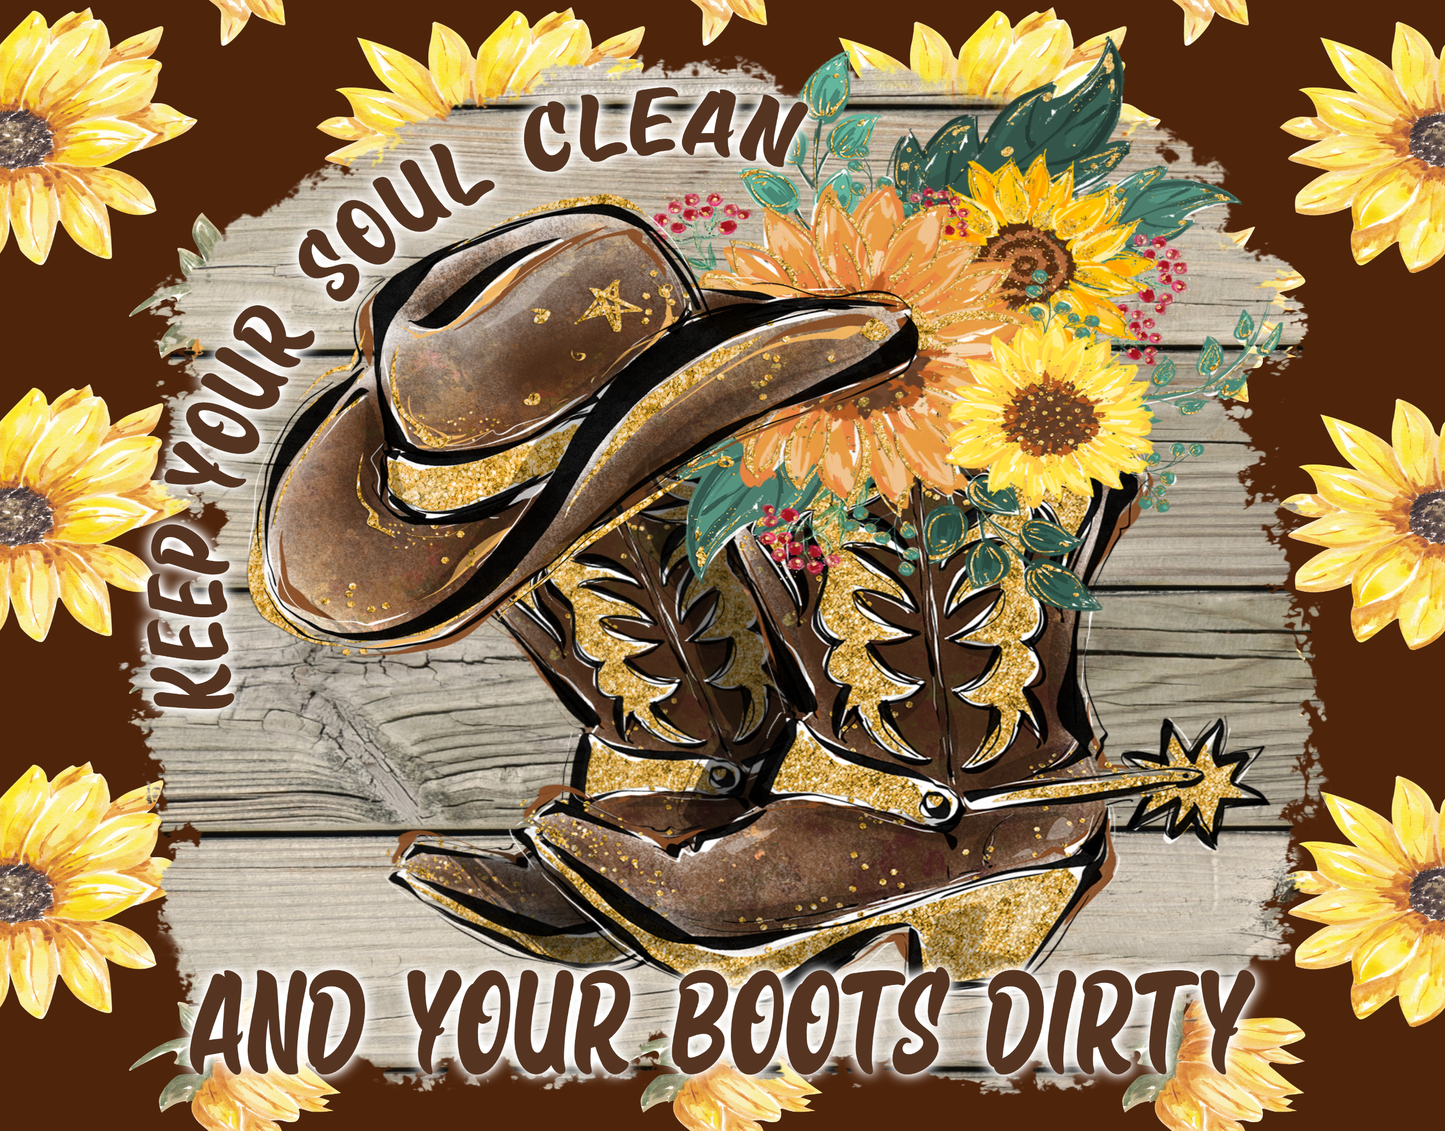 Soul Clean Boots Dirty 7x9